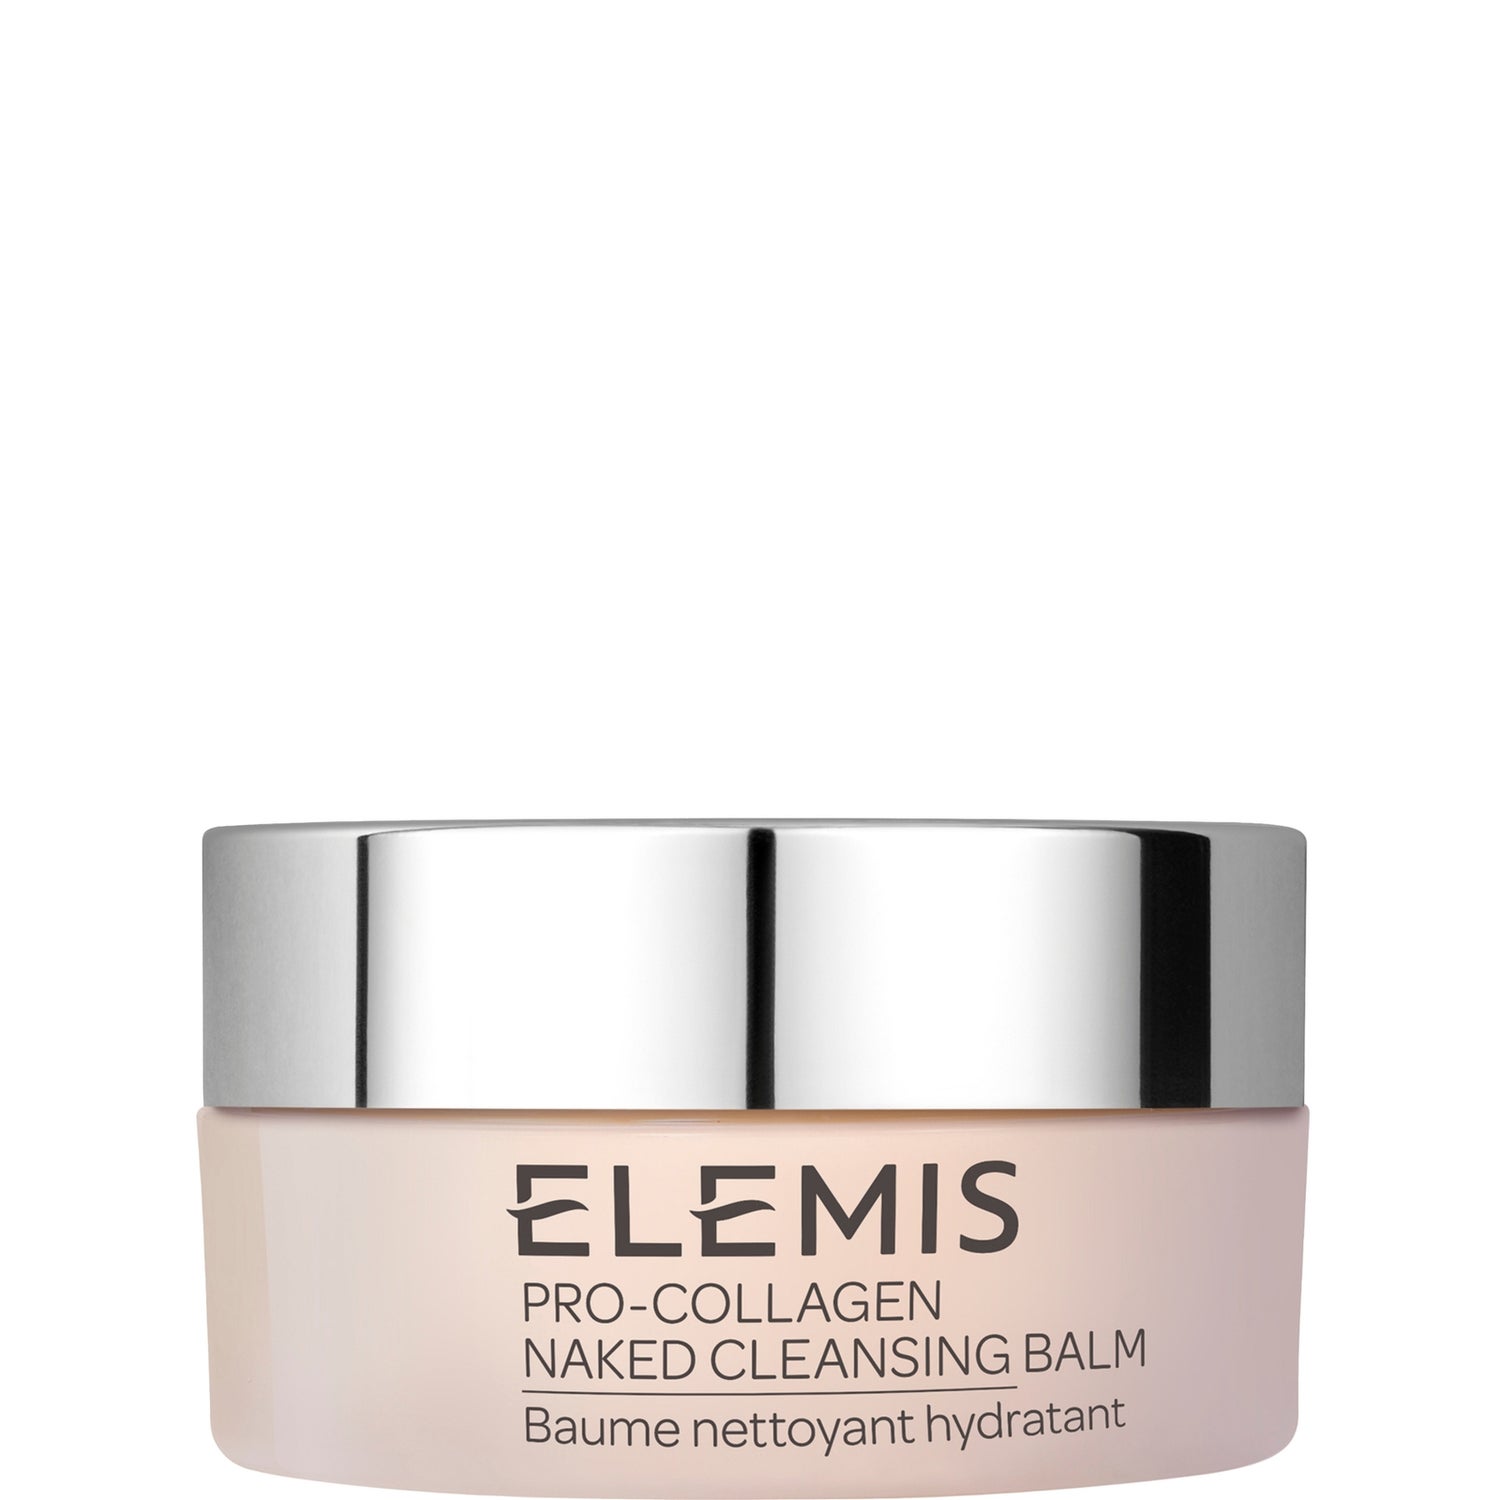 Pro-Collagen Naked Cleansing Balm 100g 骨膠原全效卸妝膏100g